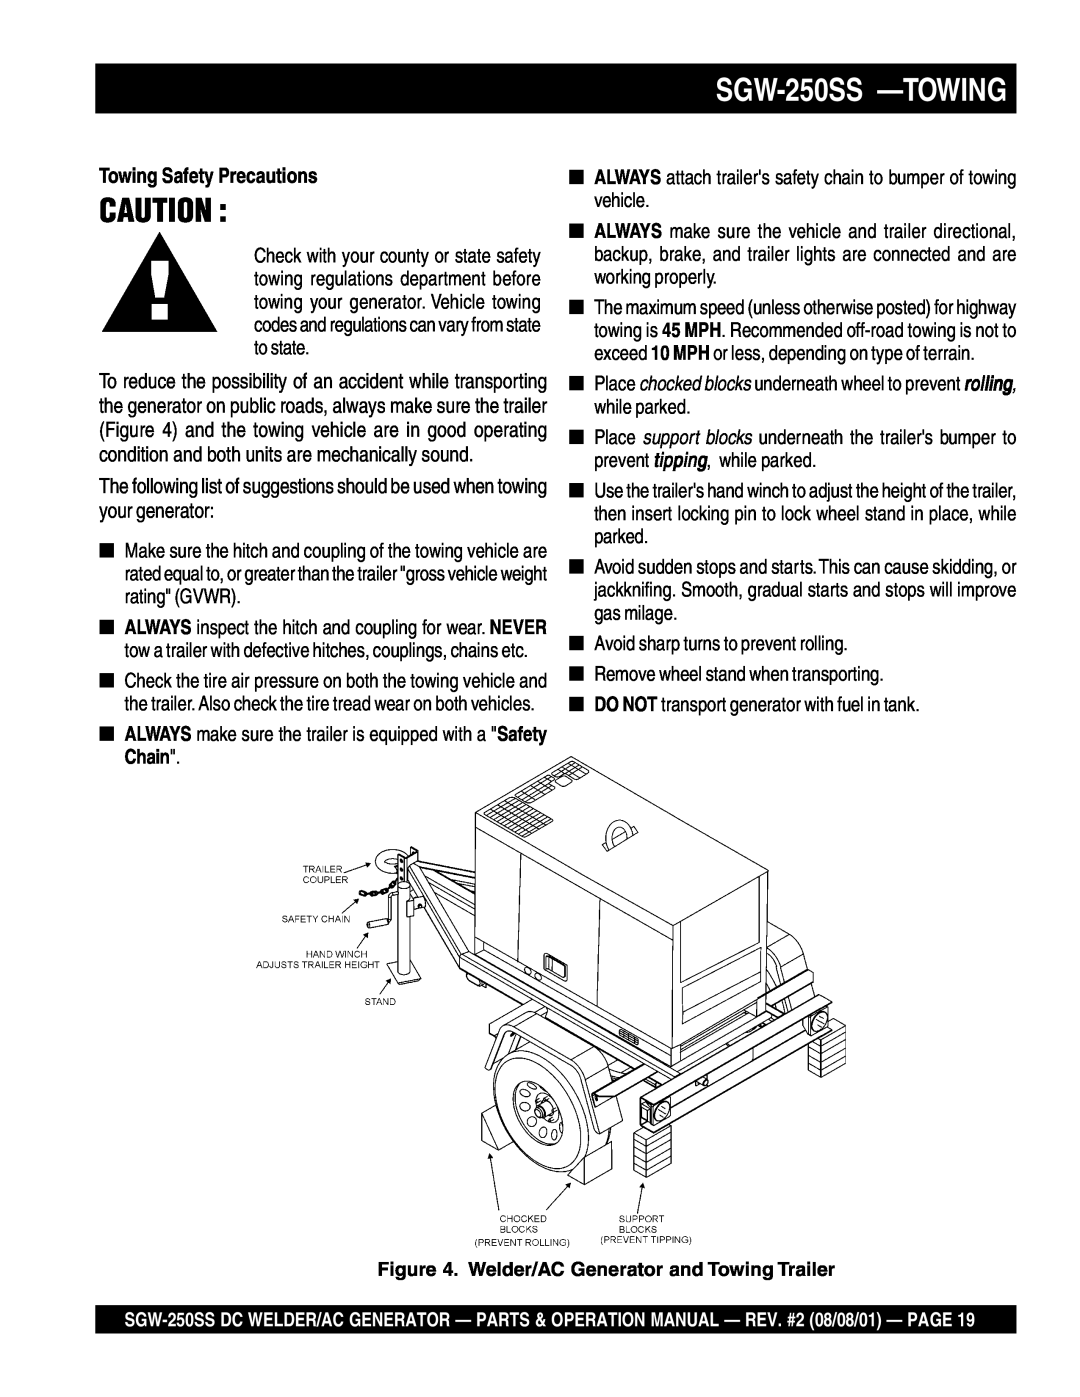 Multiquip operation manual SGW-250SS -TOWING, Towing Safety Precautions, Welder/AC Generator and Towing Trailer 